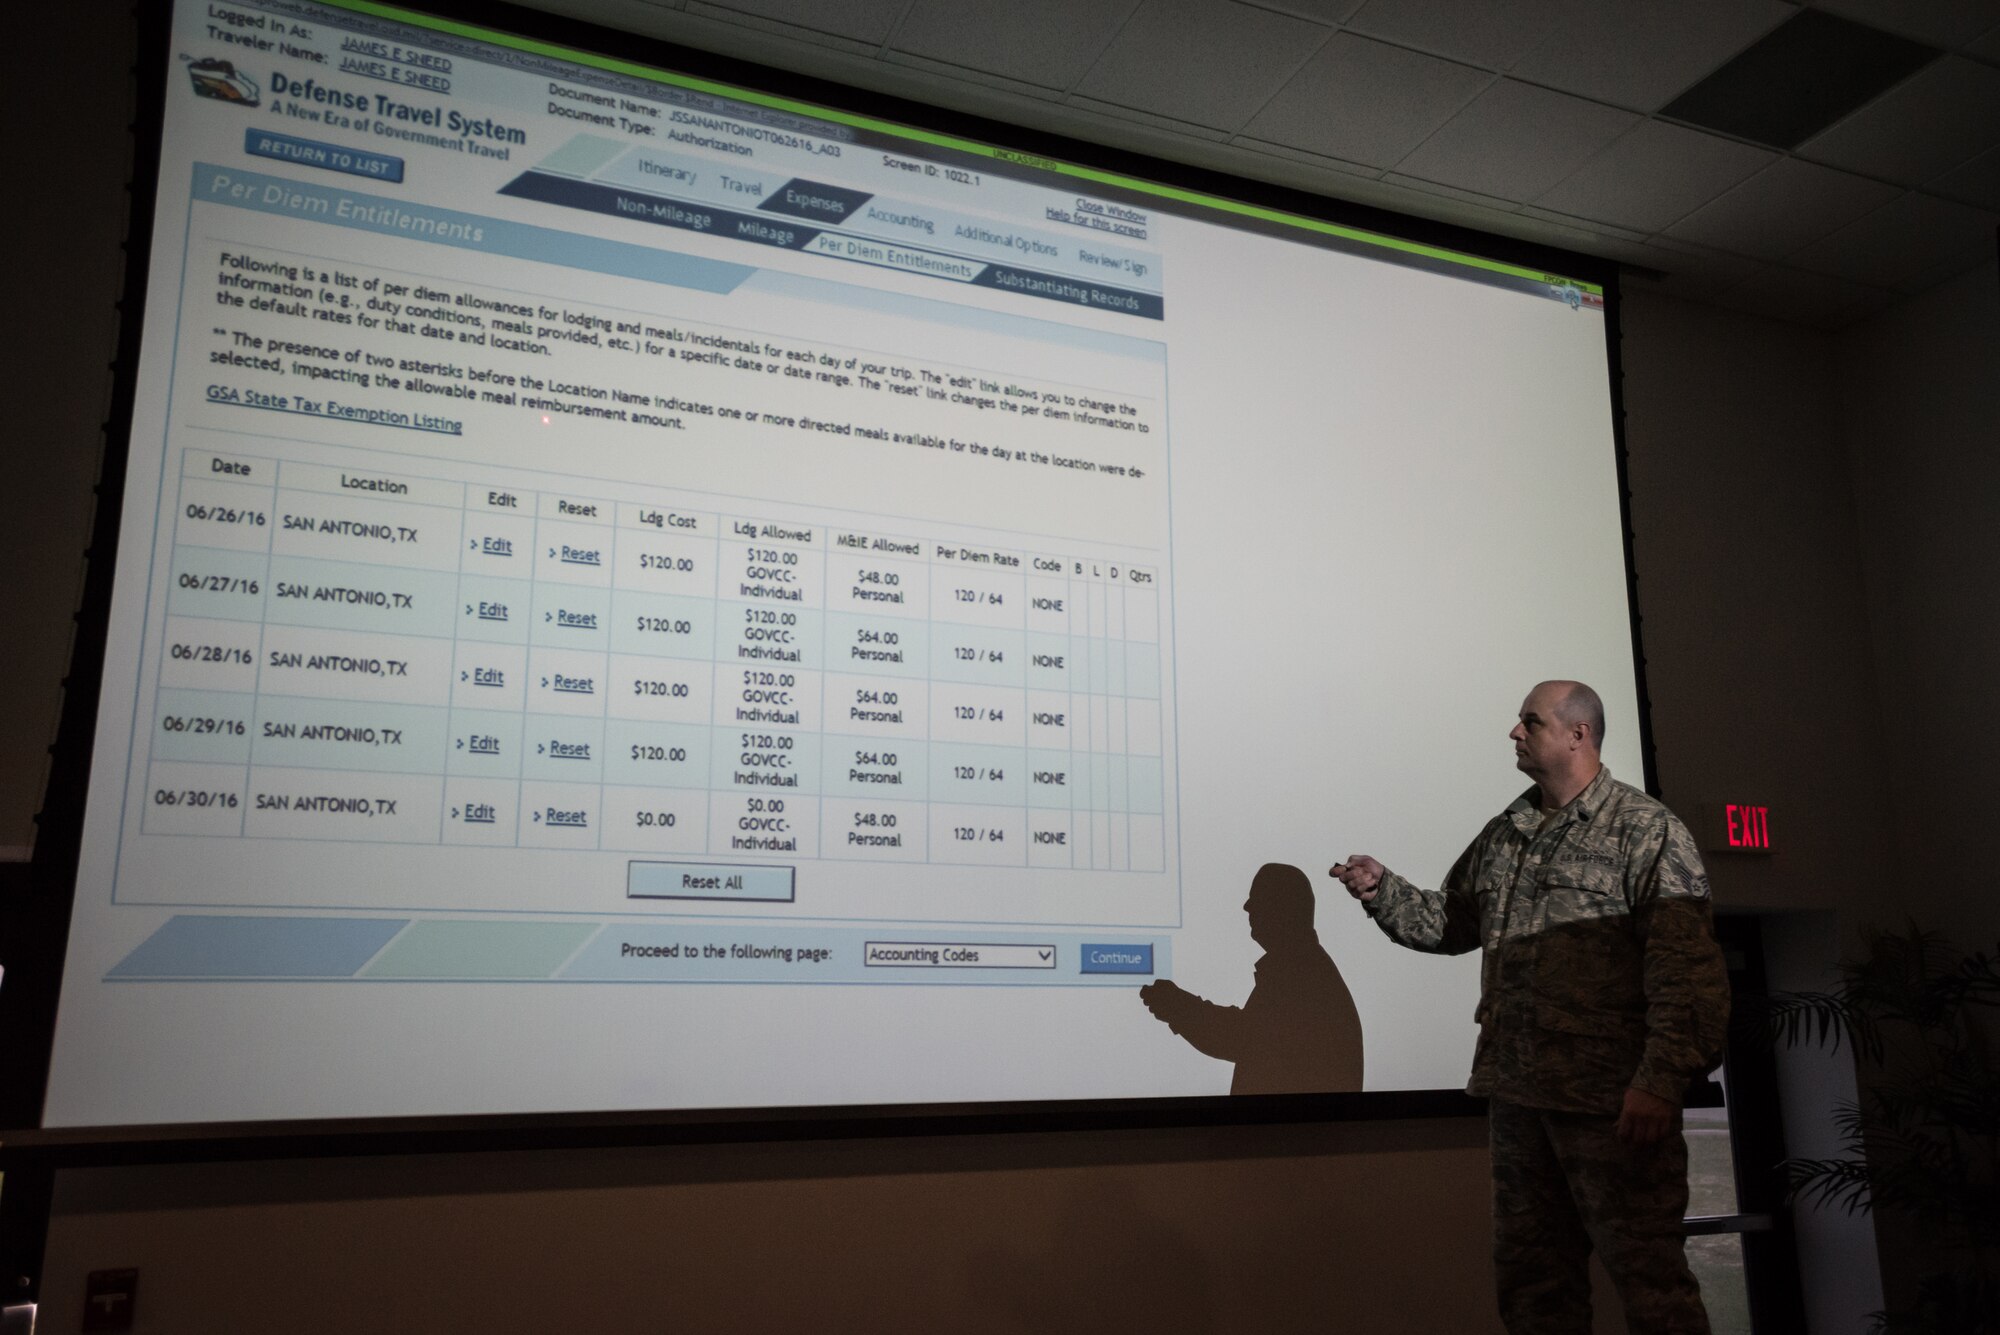 U.S. Air Force Tech. Sgt. Jim Sneed, NCOIC of financial services for the Kentucky Air National Guard’s 123rd Airlift Wing, teaches a class on the Defense Travel System at the Air National Guard’s Air Dominance Center in Savannah, Ga., June 15, 2016. The class is part of Maintenance University here, a weeklong course designed to provide intensive instruction to aircraft maintainers. Now in its eighth year, Maintenance University is sponsored by the 123rd Airlift Wing. (U.S. Air National Guard photo by Lt. Col. Dale Greer)